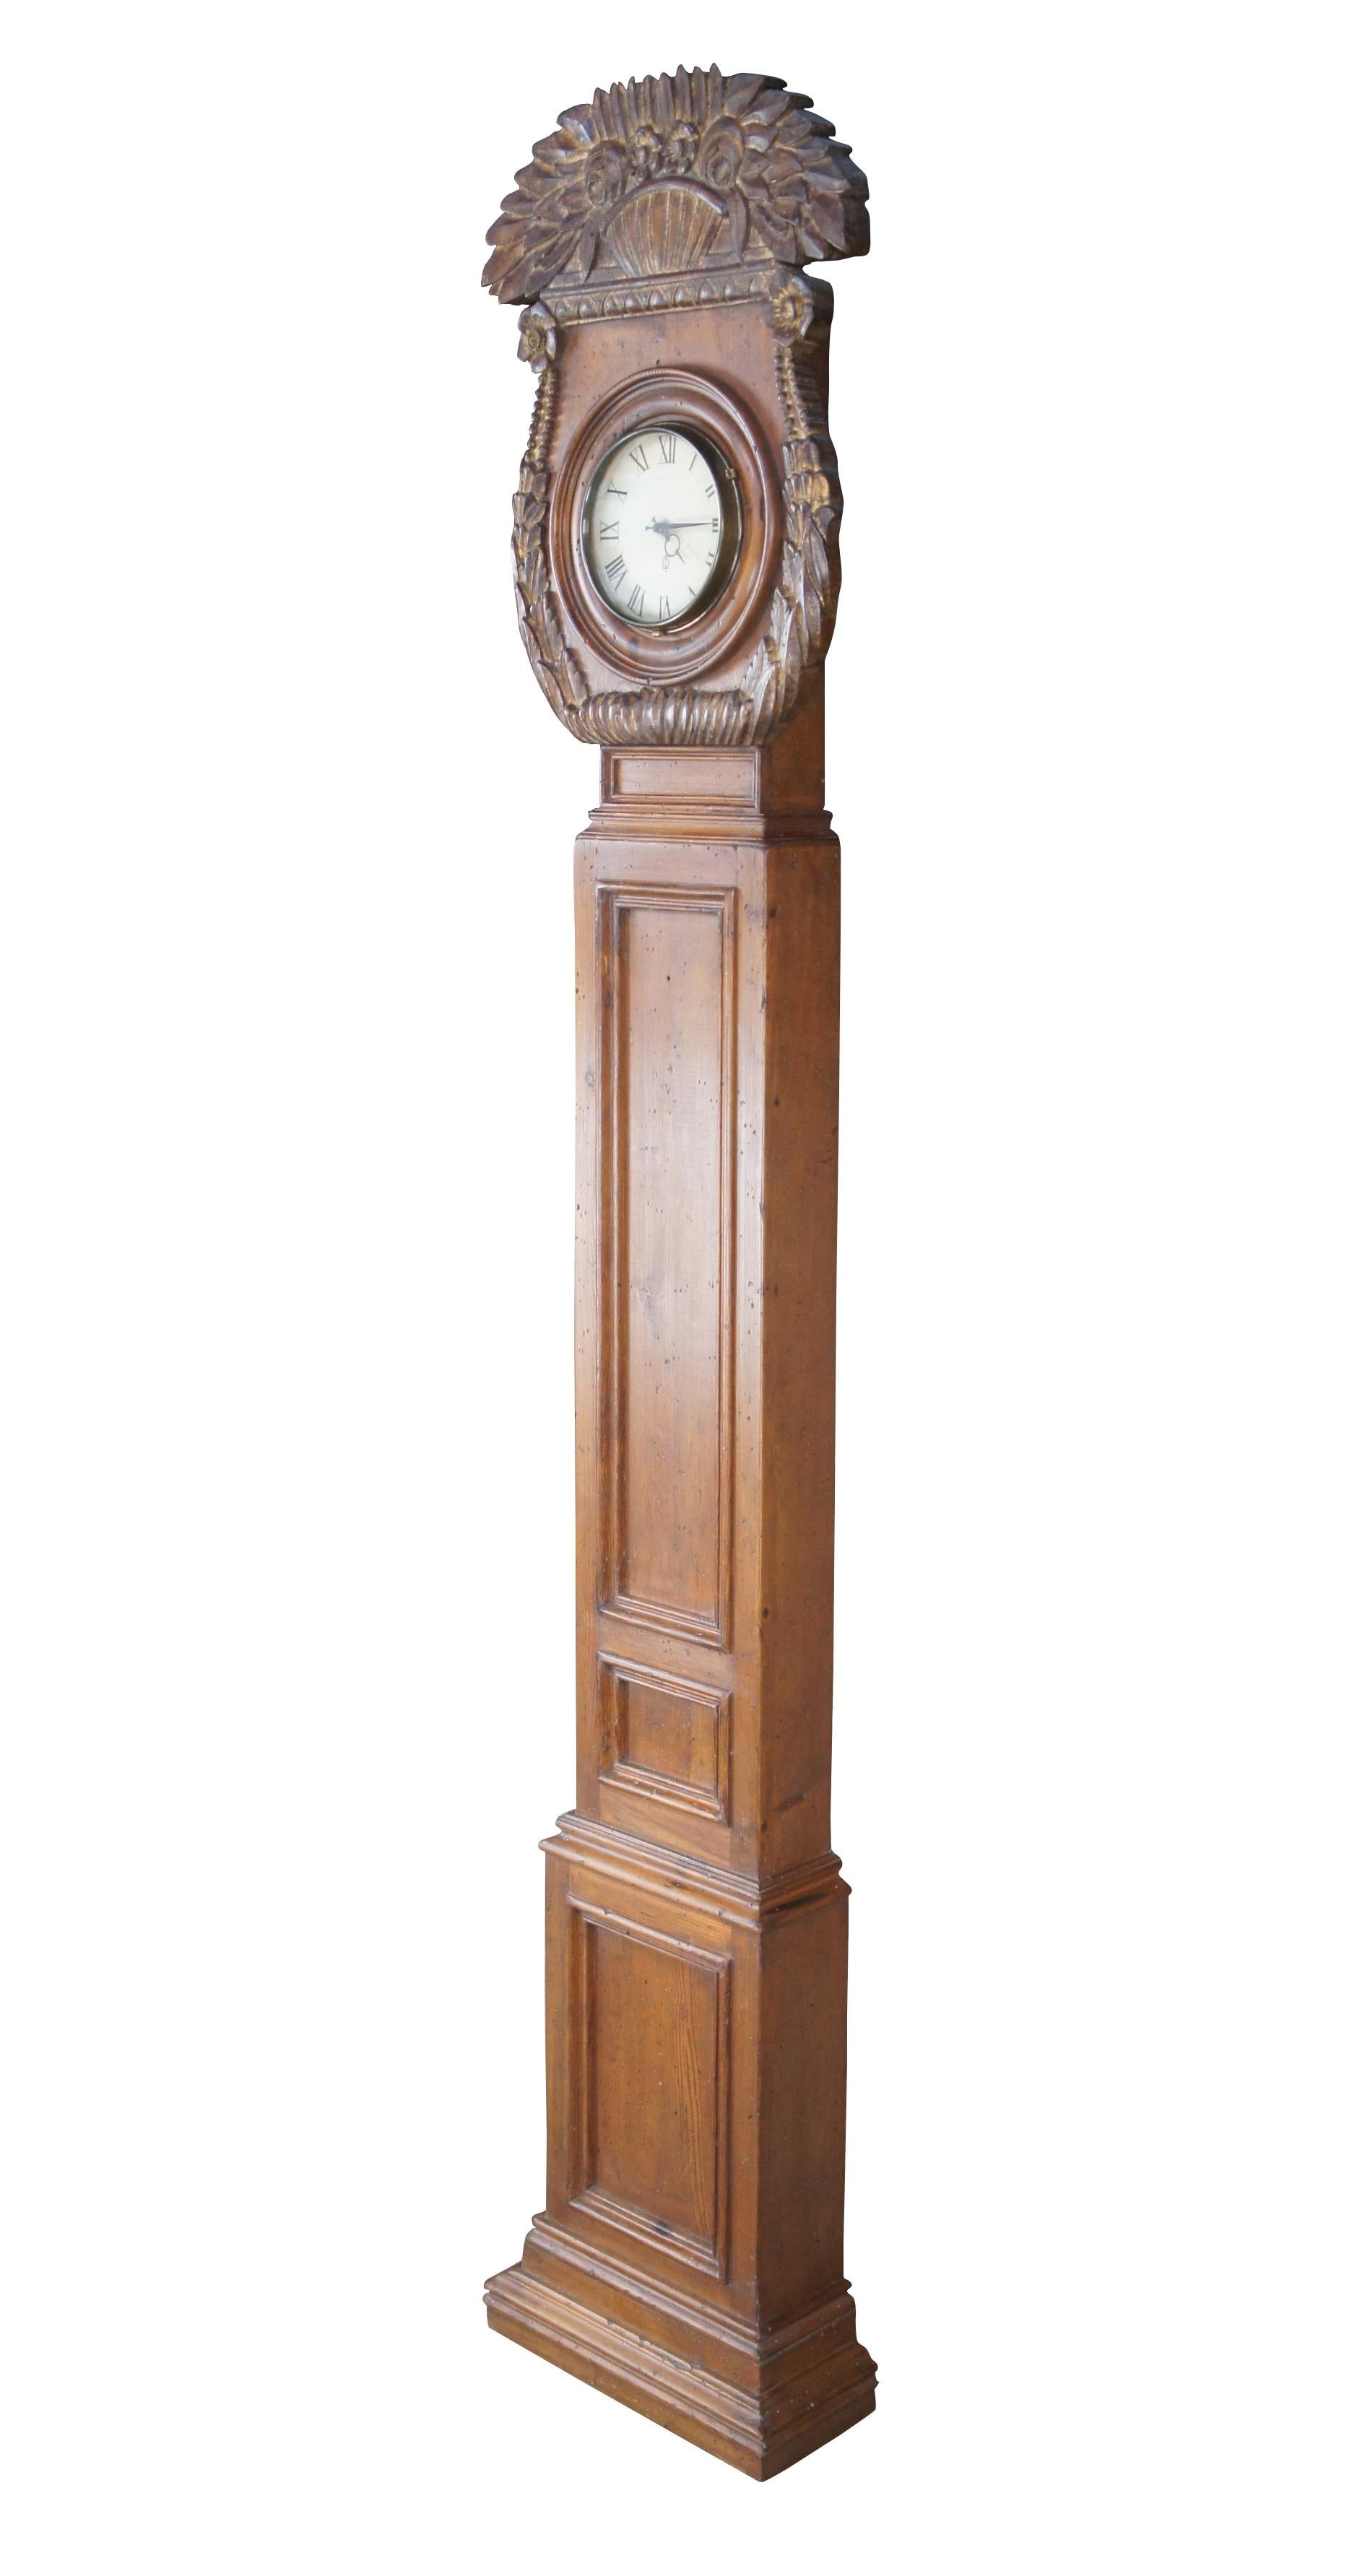 Gustavian inspired longcase clock by Chapman, circa last quarter 20th century. Made from distressed pine with a diminutive long paneled case. The round face of the clock is protected by a glass window and surrounded by acanthus leaf carvings. The